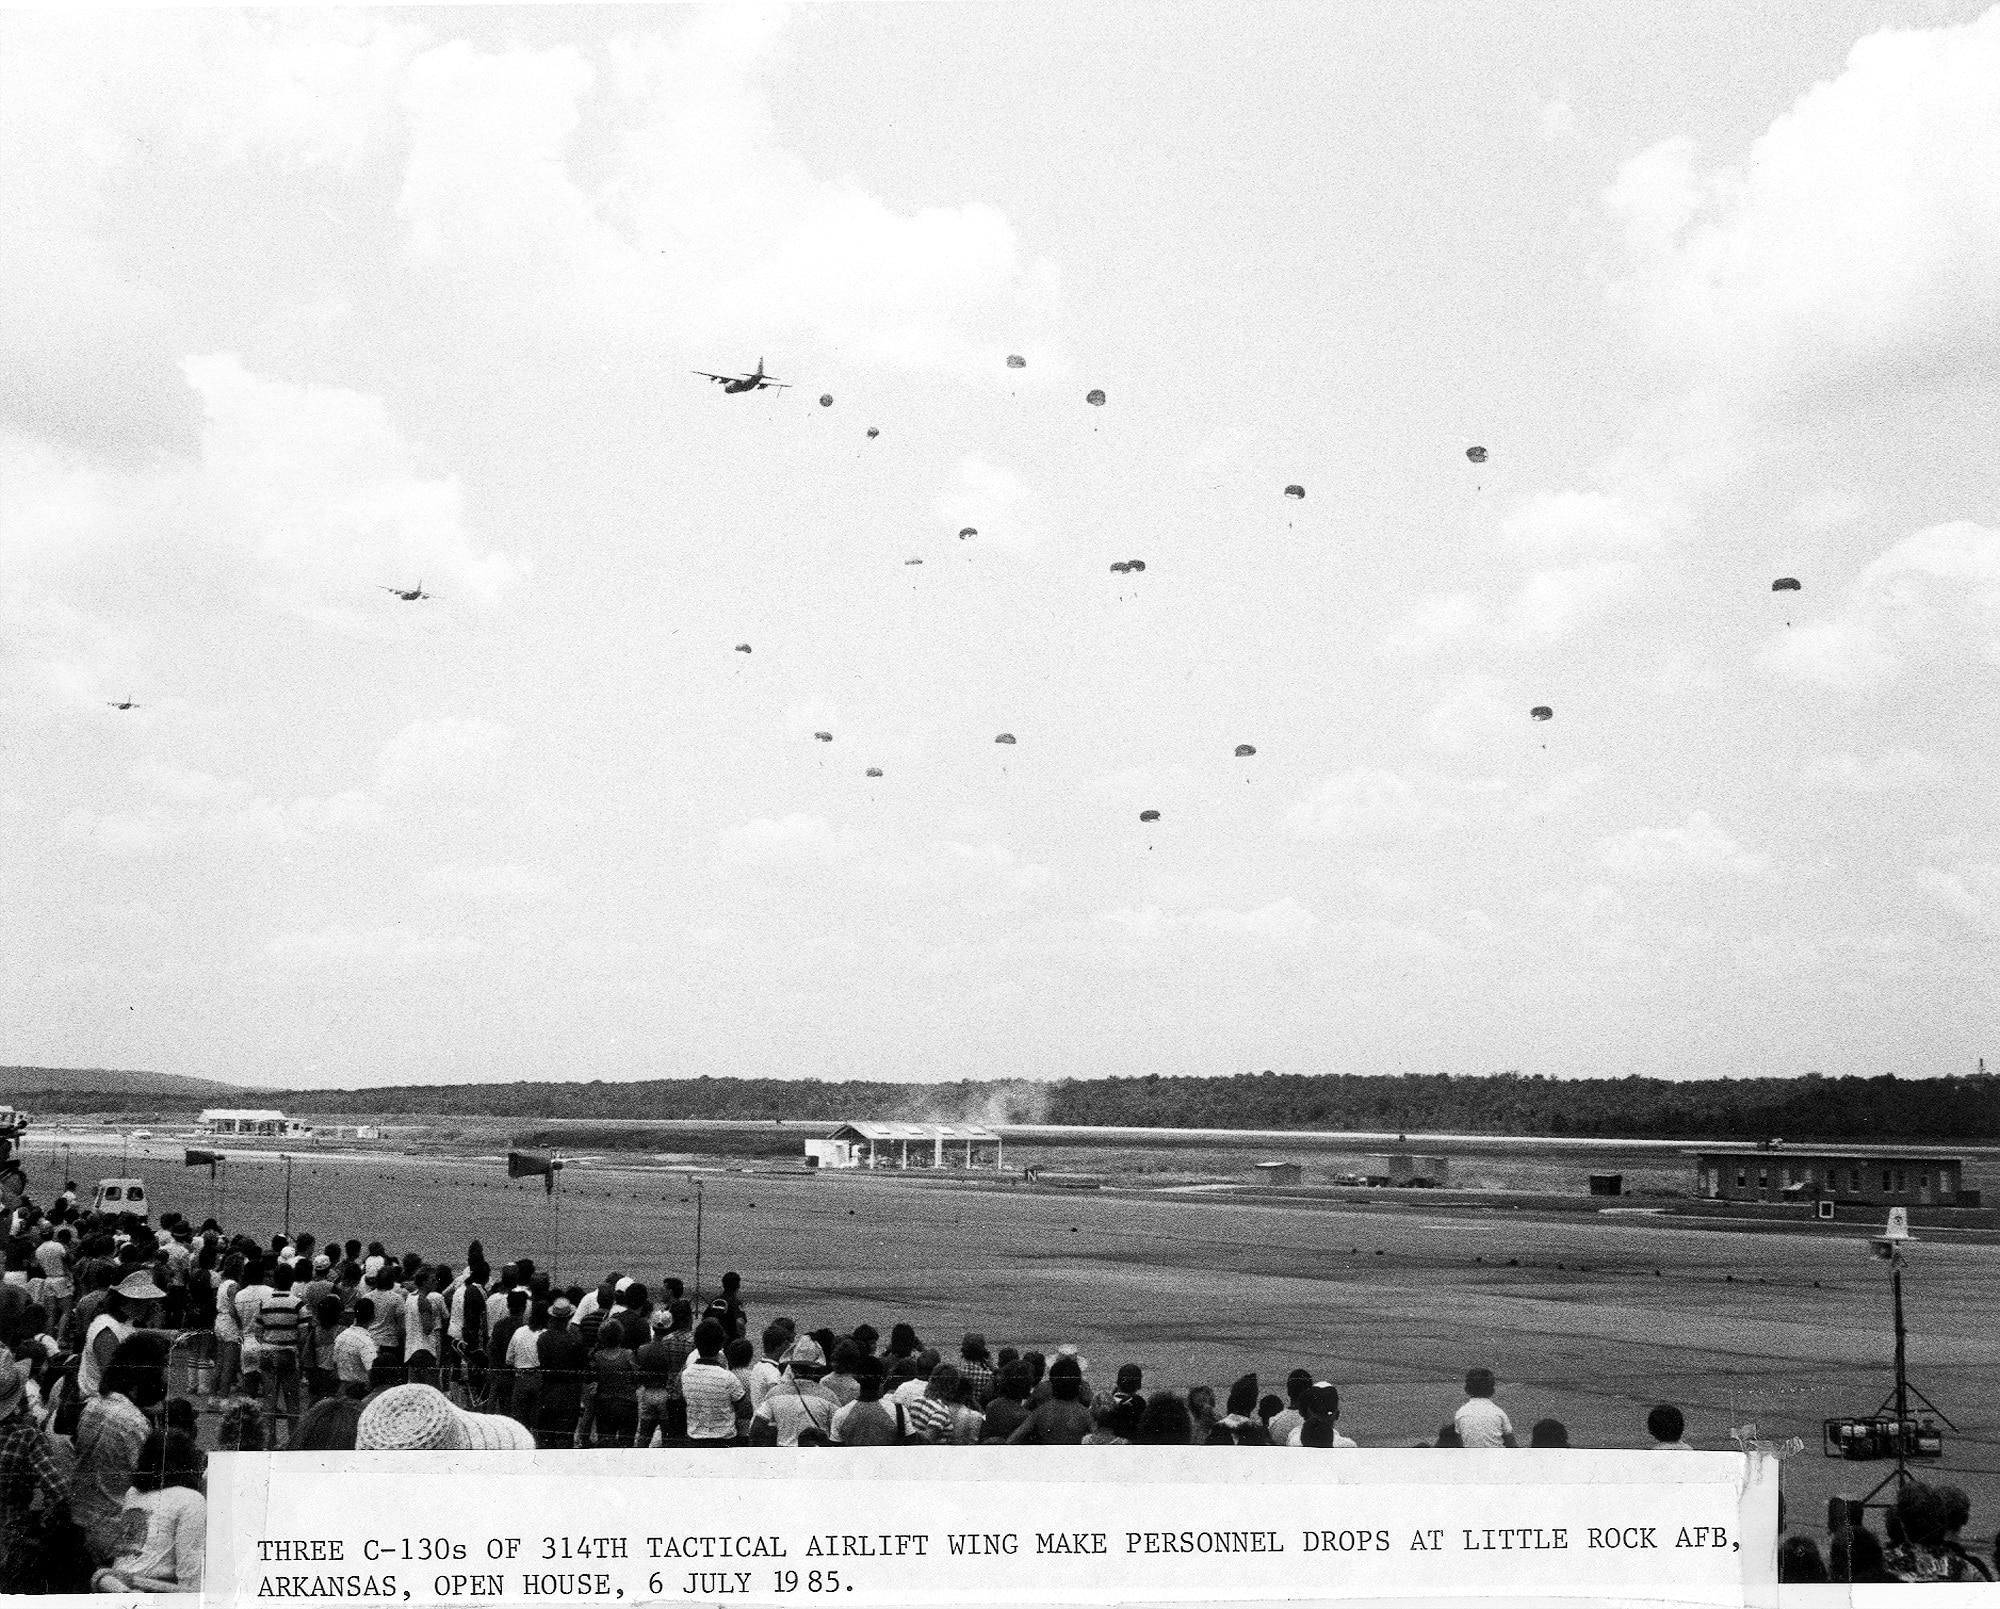 C-130s conduct an airdrop during an airshow